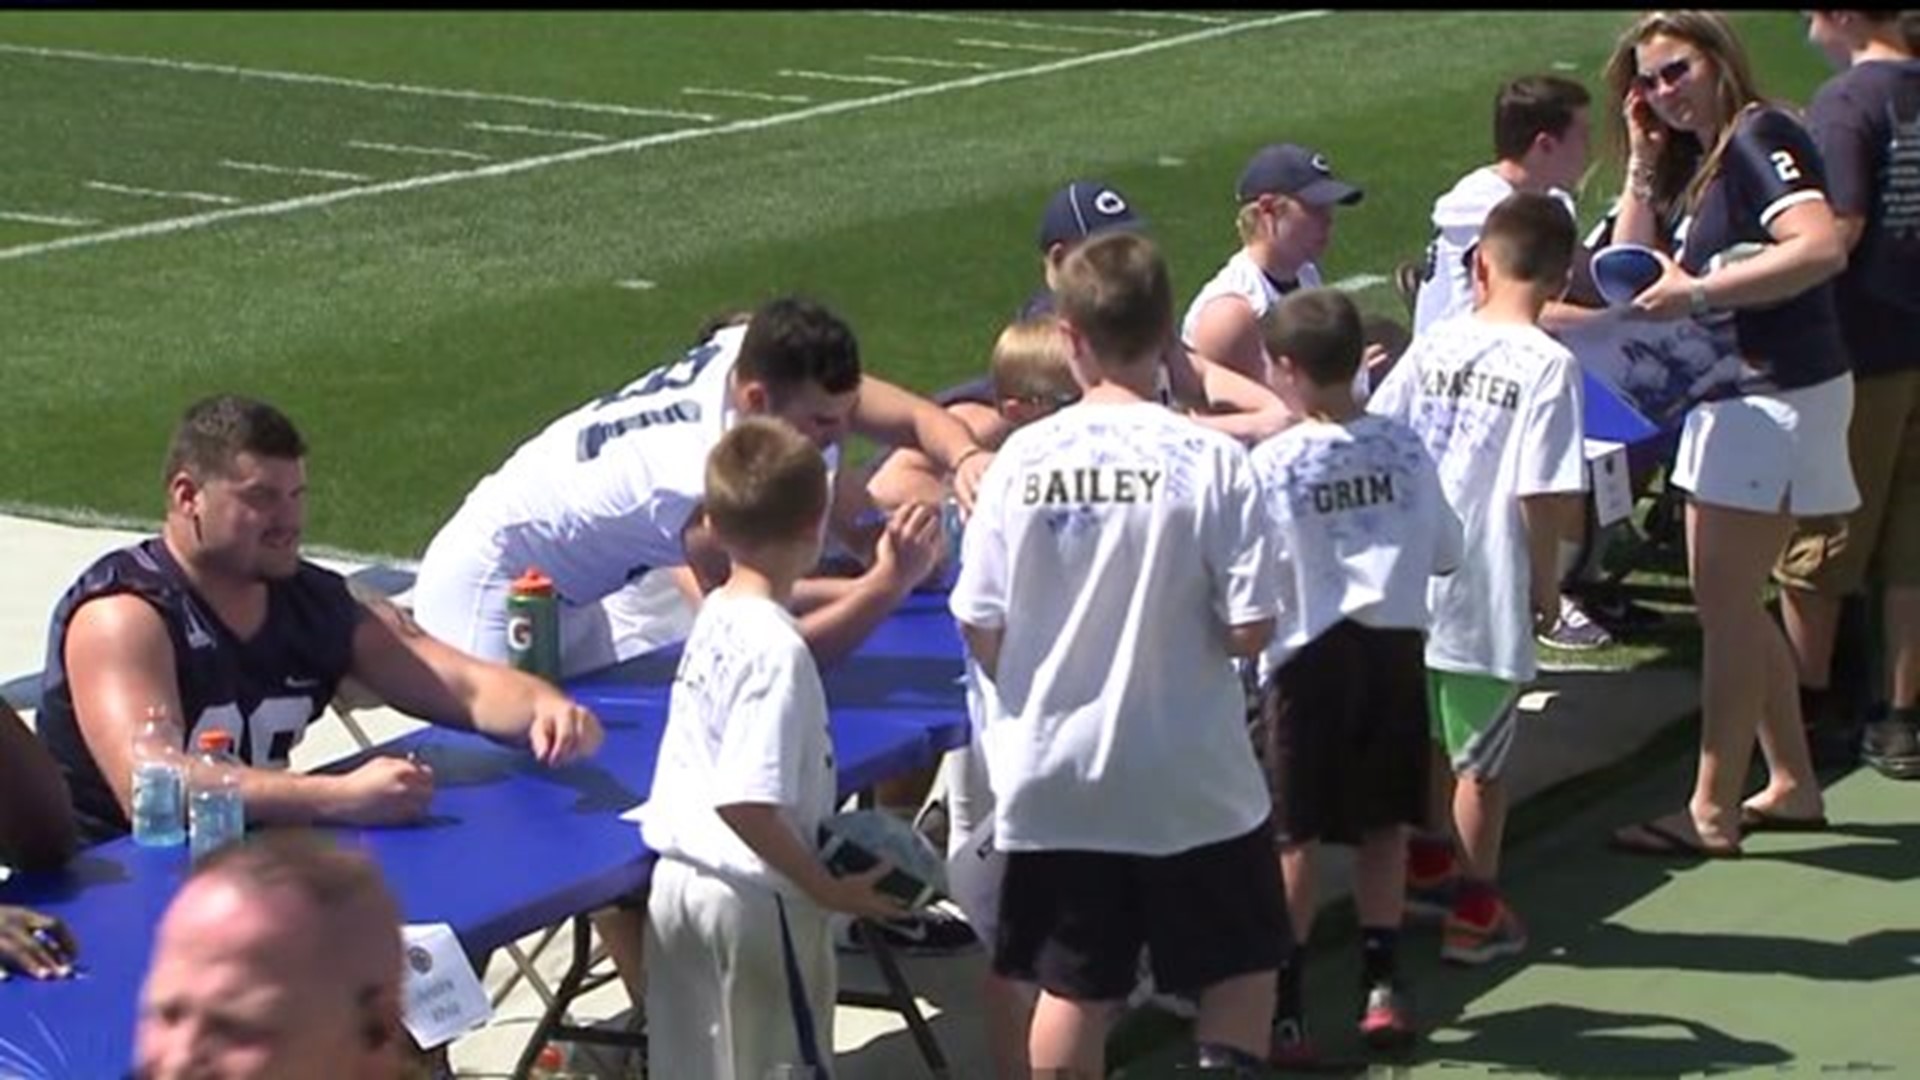 PSU Players Meet Fans Before Blue White Game